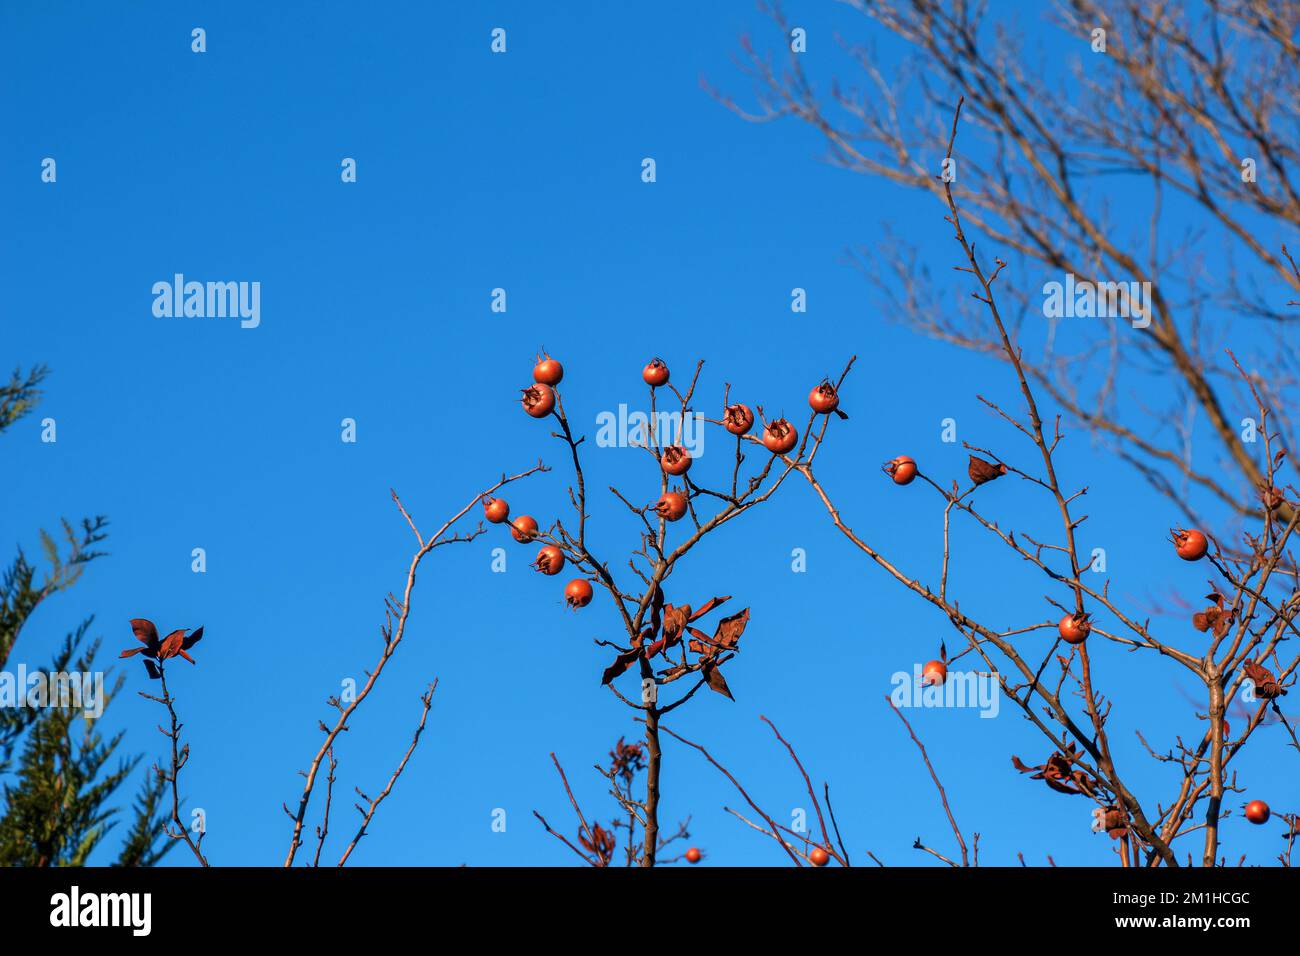 A lot of ripe medlar fruits on tree branches against the blue sky on sunny day. Common Medlar or Mespilus germanica, Dutch medlar. Nature background. Stock Photo